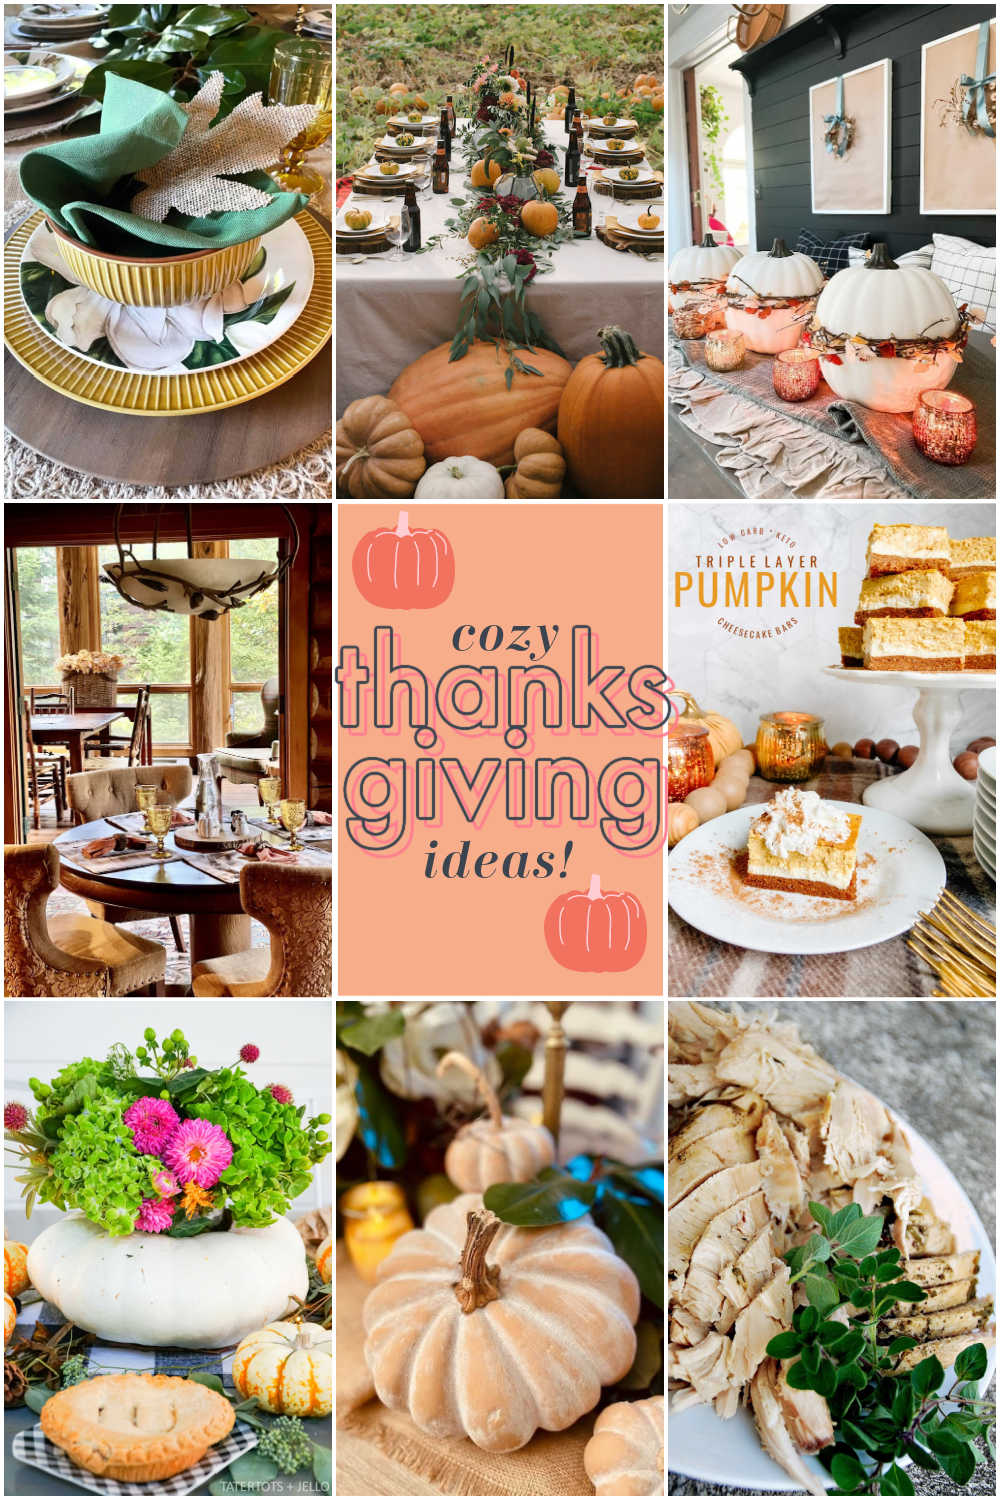 Welcome Home Saturday - Cozy Thanksgiving Ideas! Now that the air is cooler, make your home cozy with these pretty ideas! 